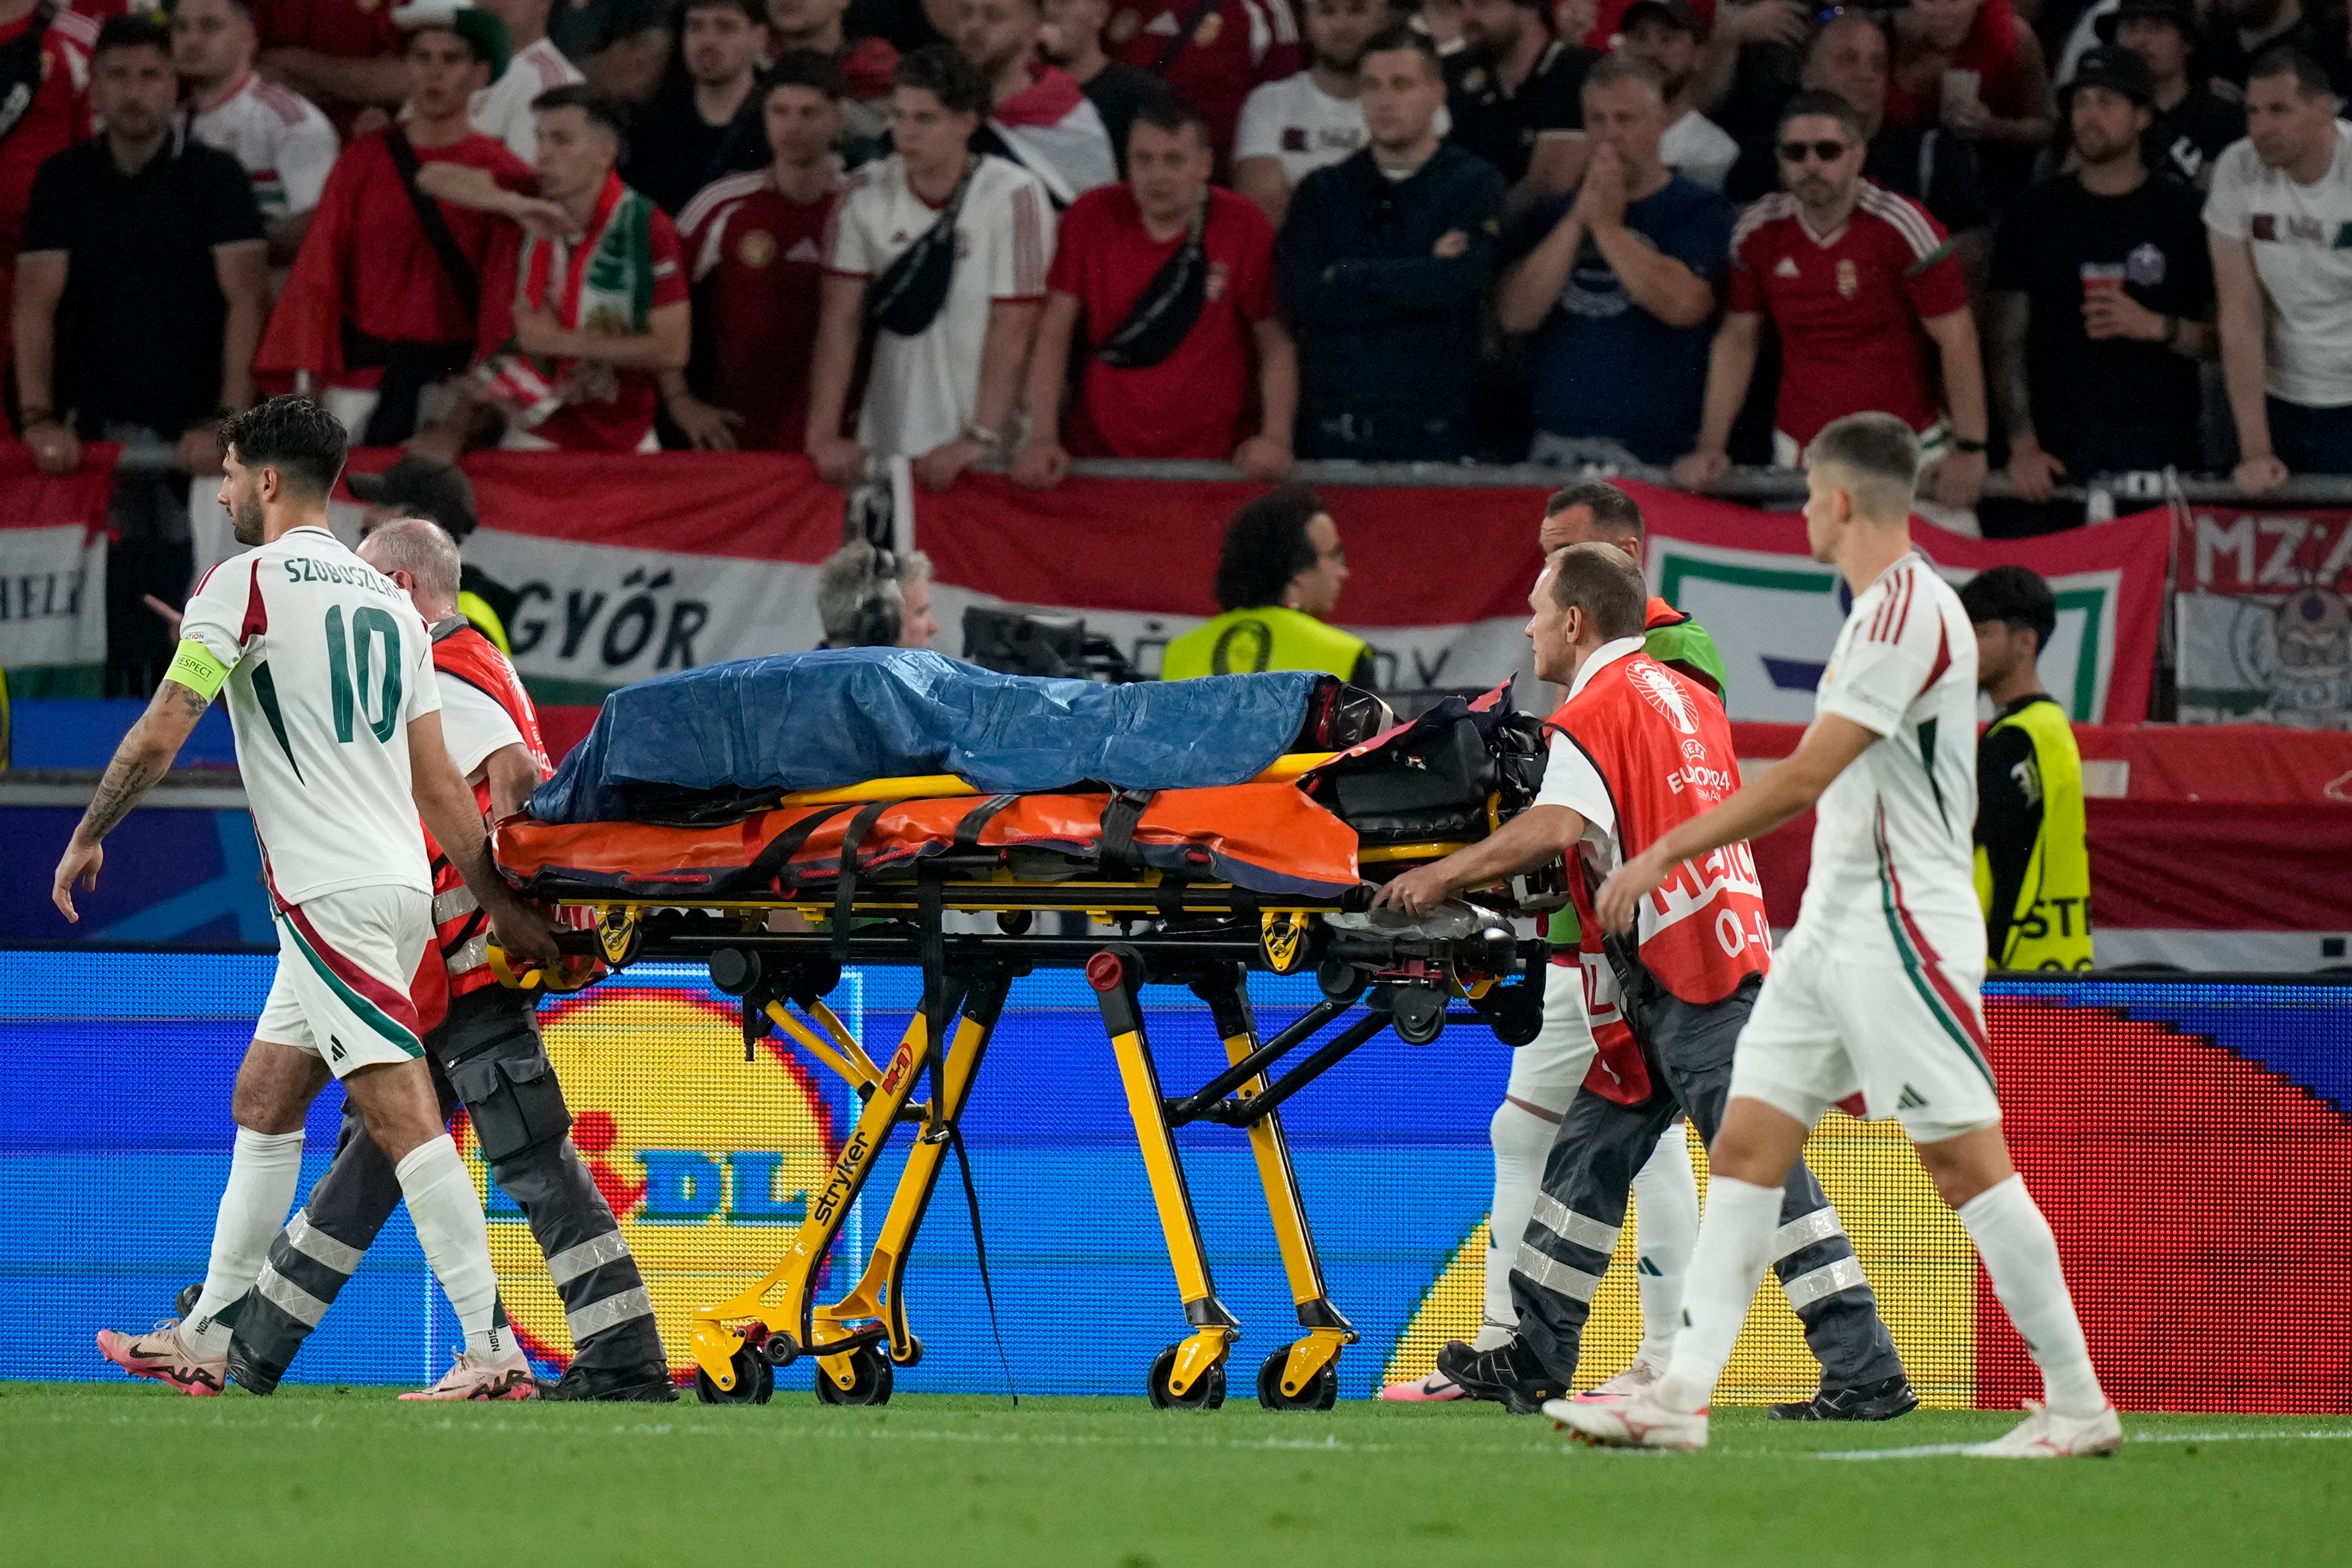 Barnabas Varga was stretchered off in a scary moment at Euro 2024